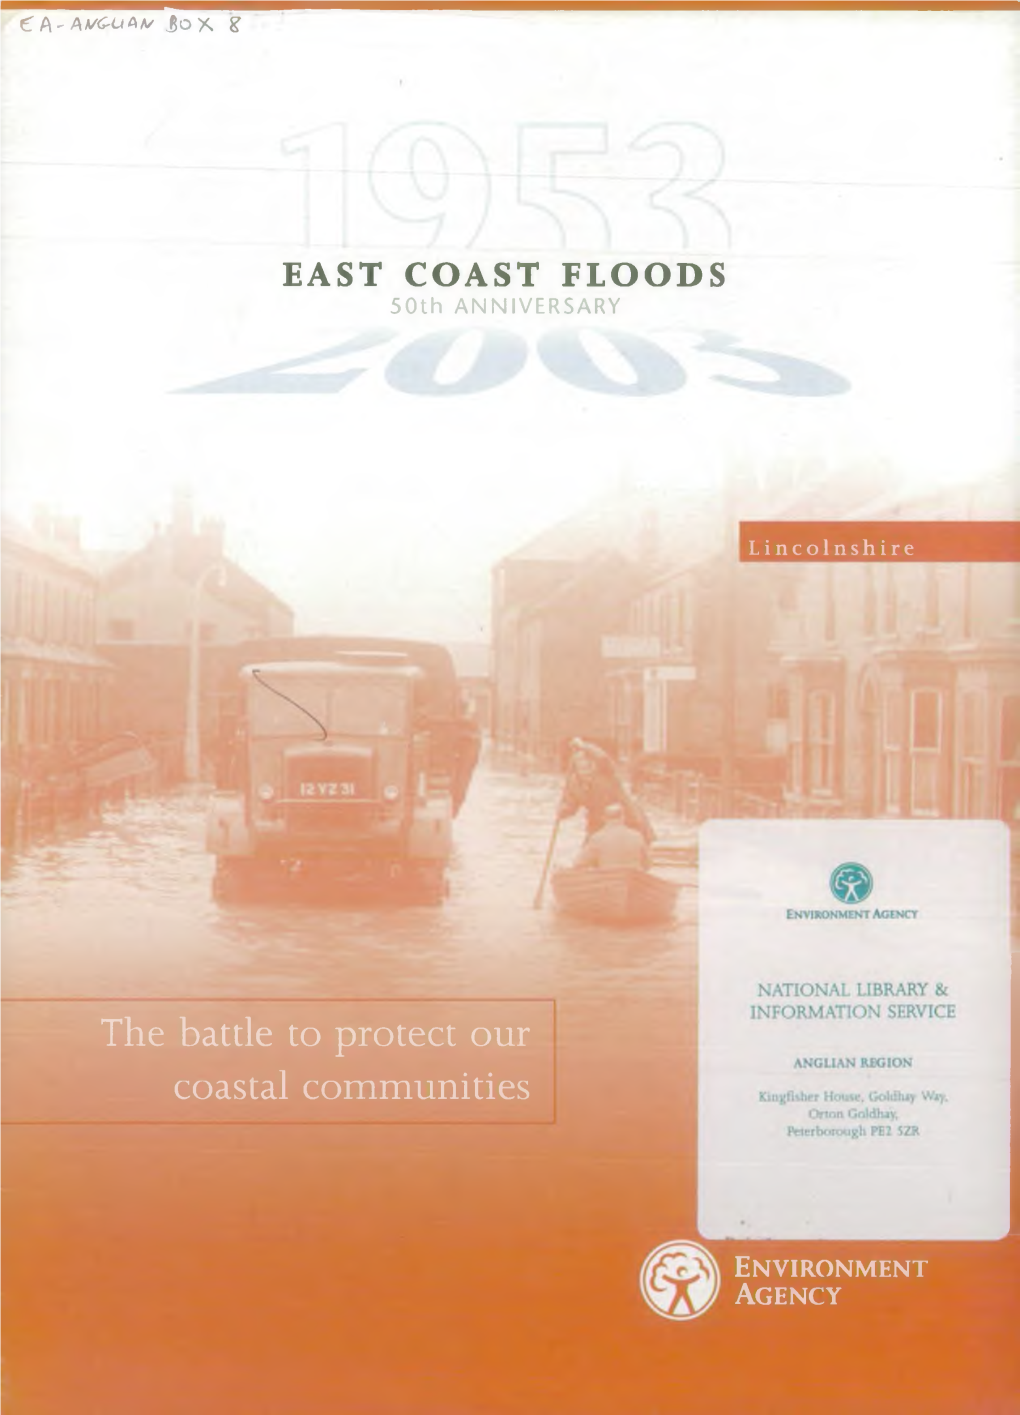 The Battle to Protect Our Coastal Communities